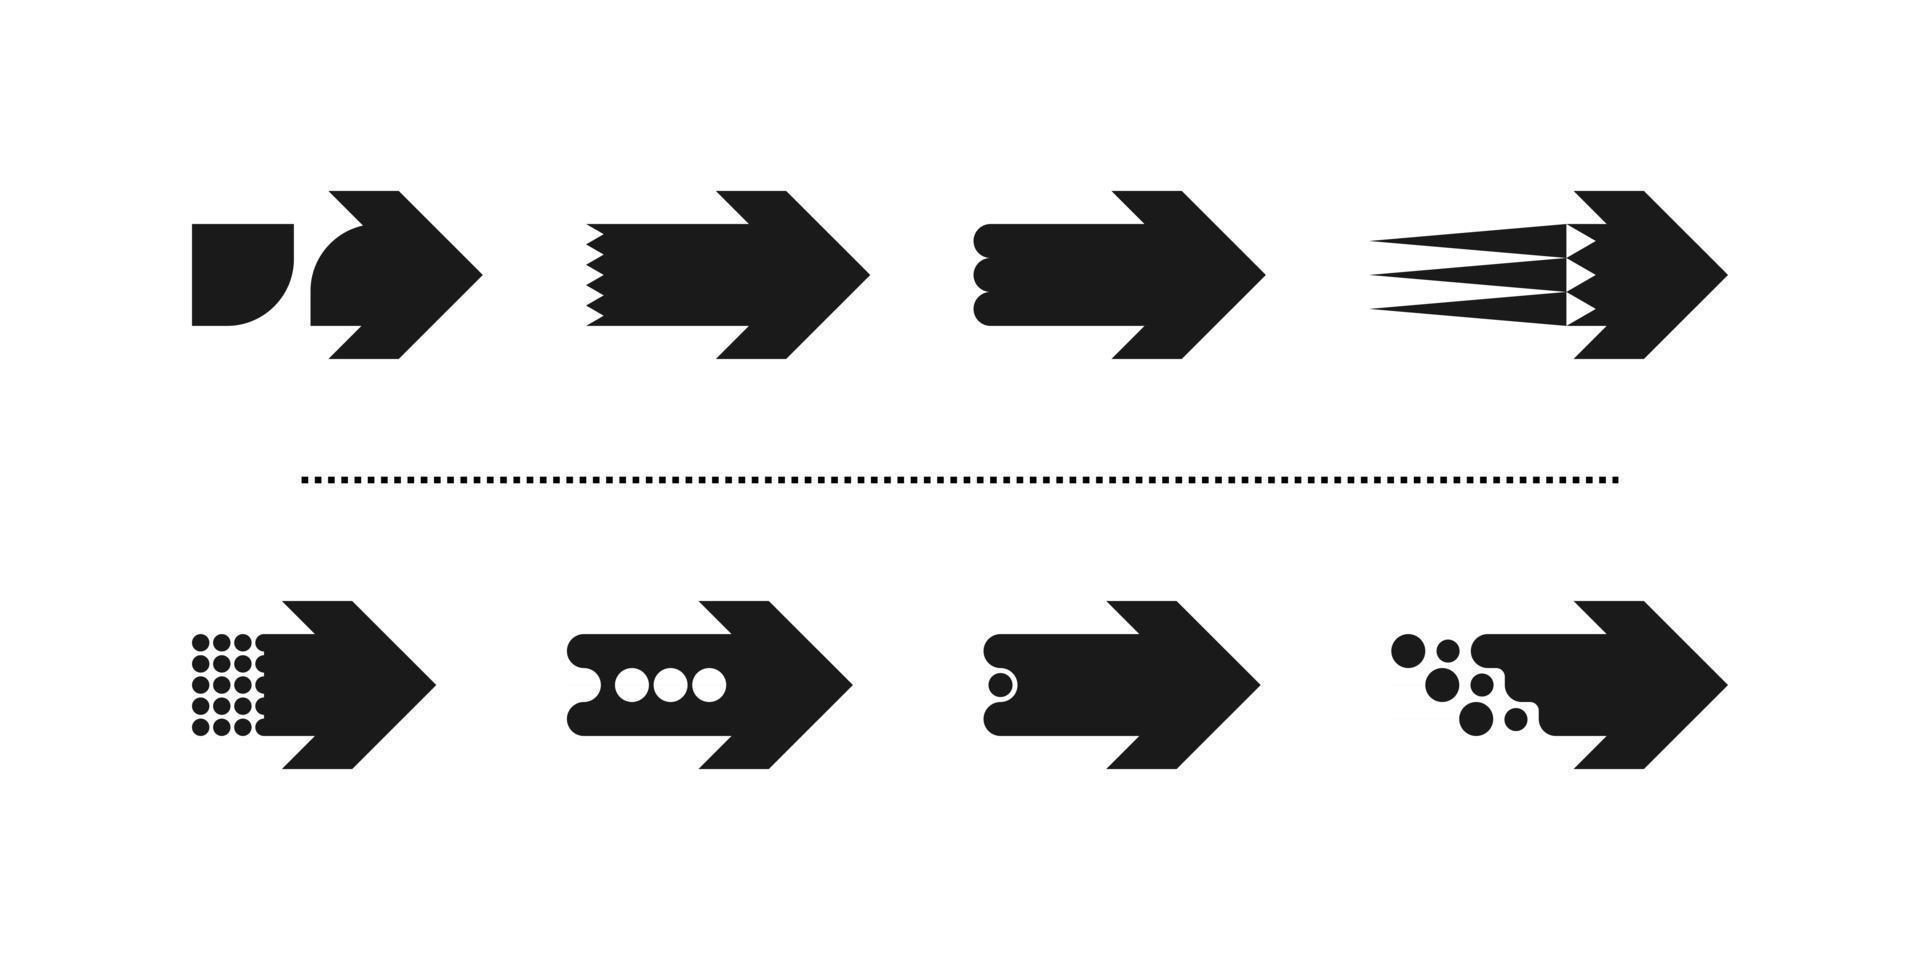 This is a set of new unusual stylish flat arrows with a sharp square finish vector